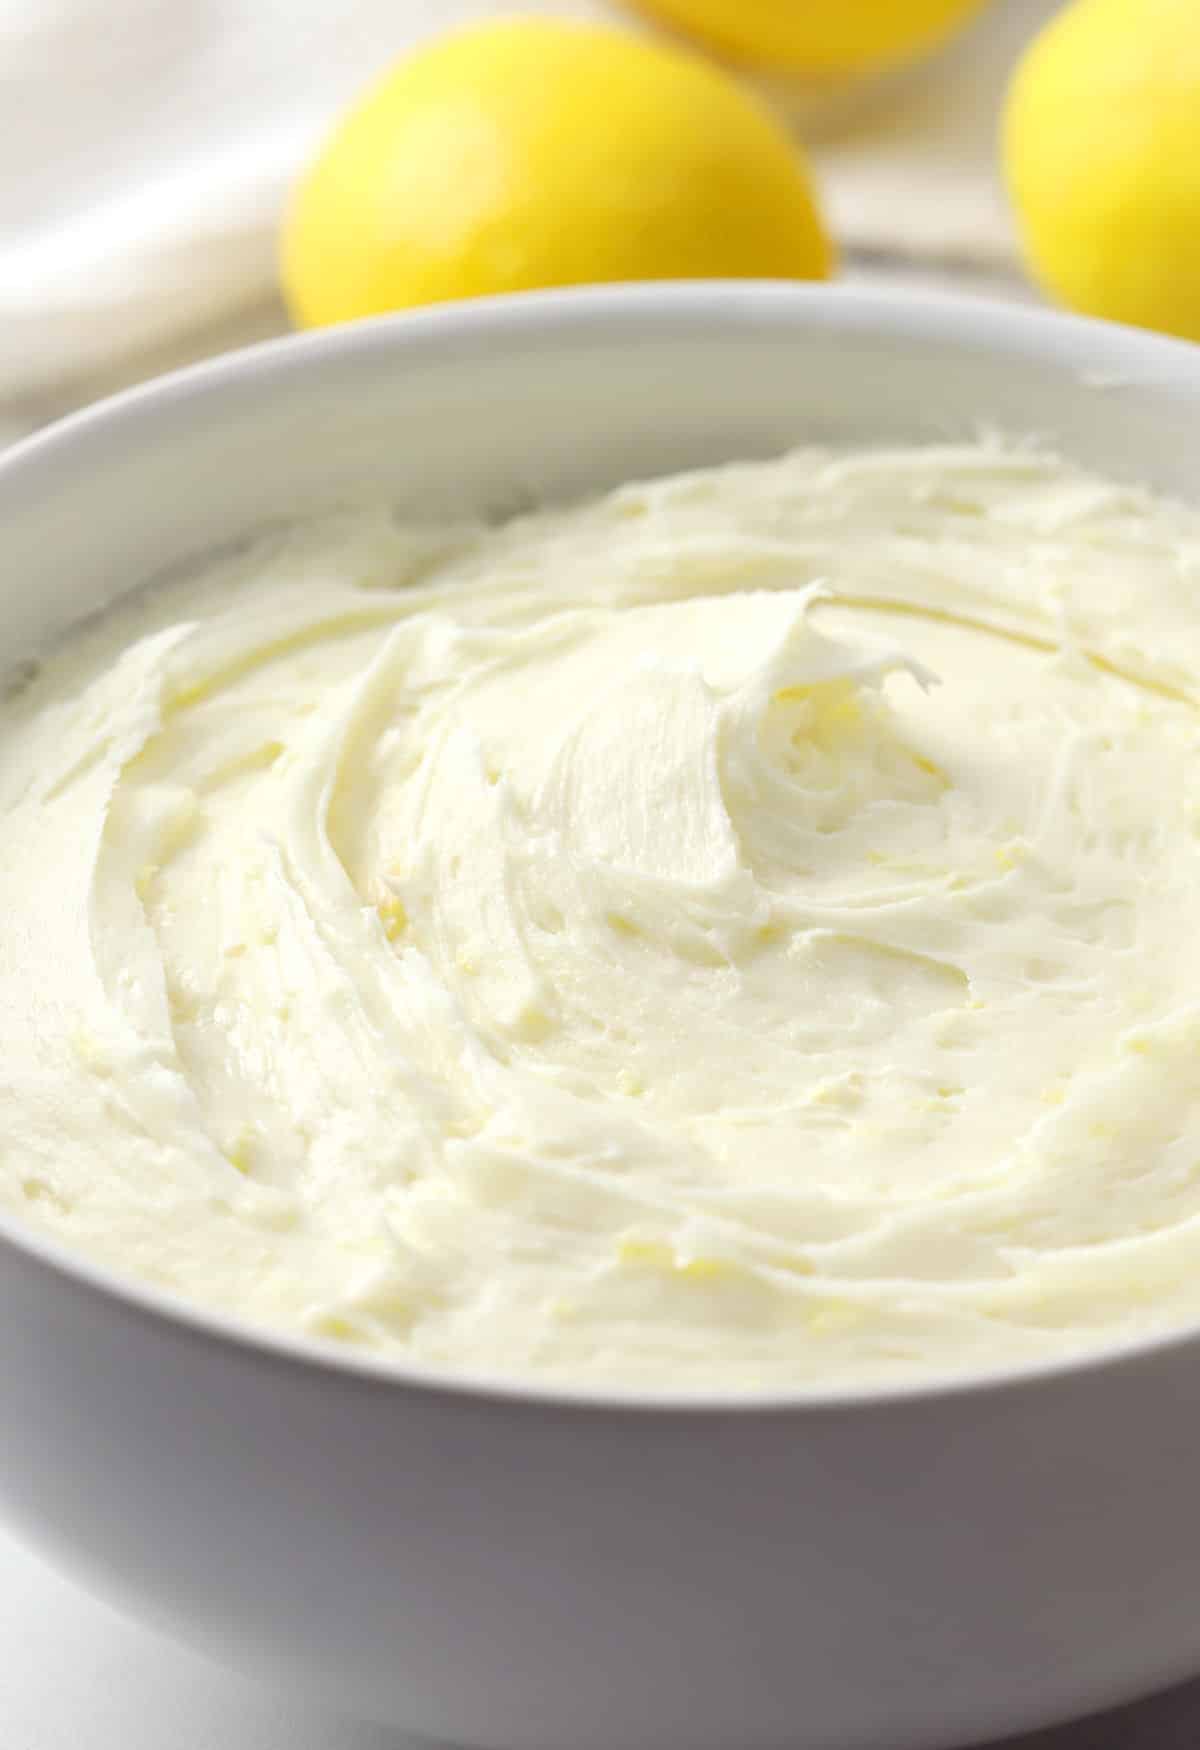 Lemon cream cheese frosting in a white bowl.